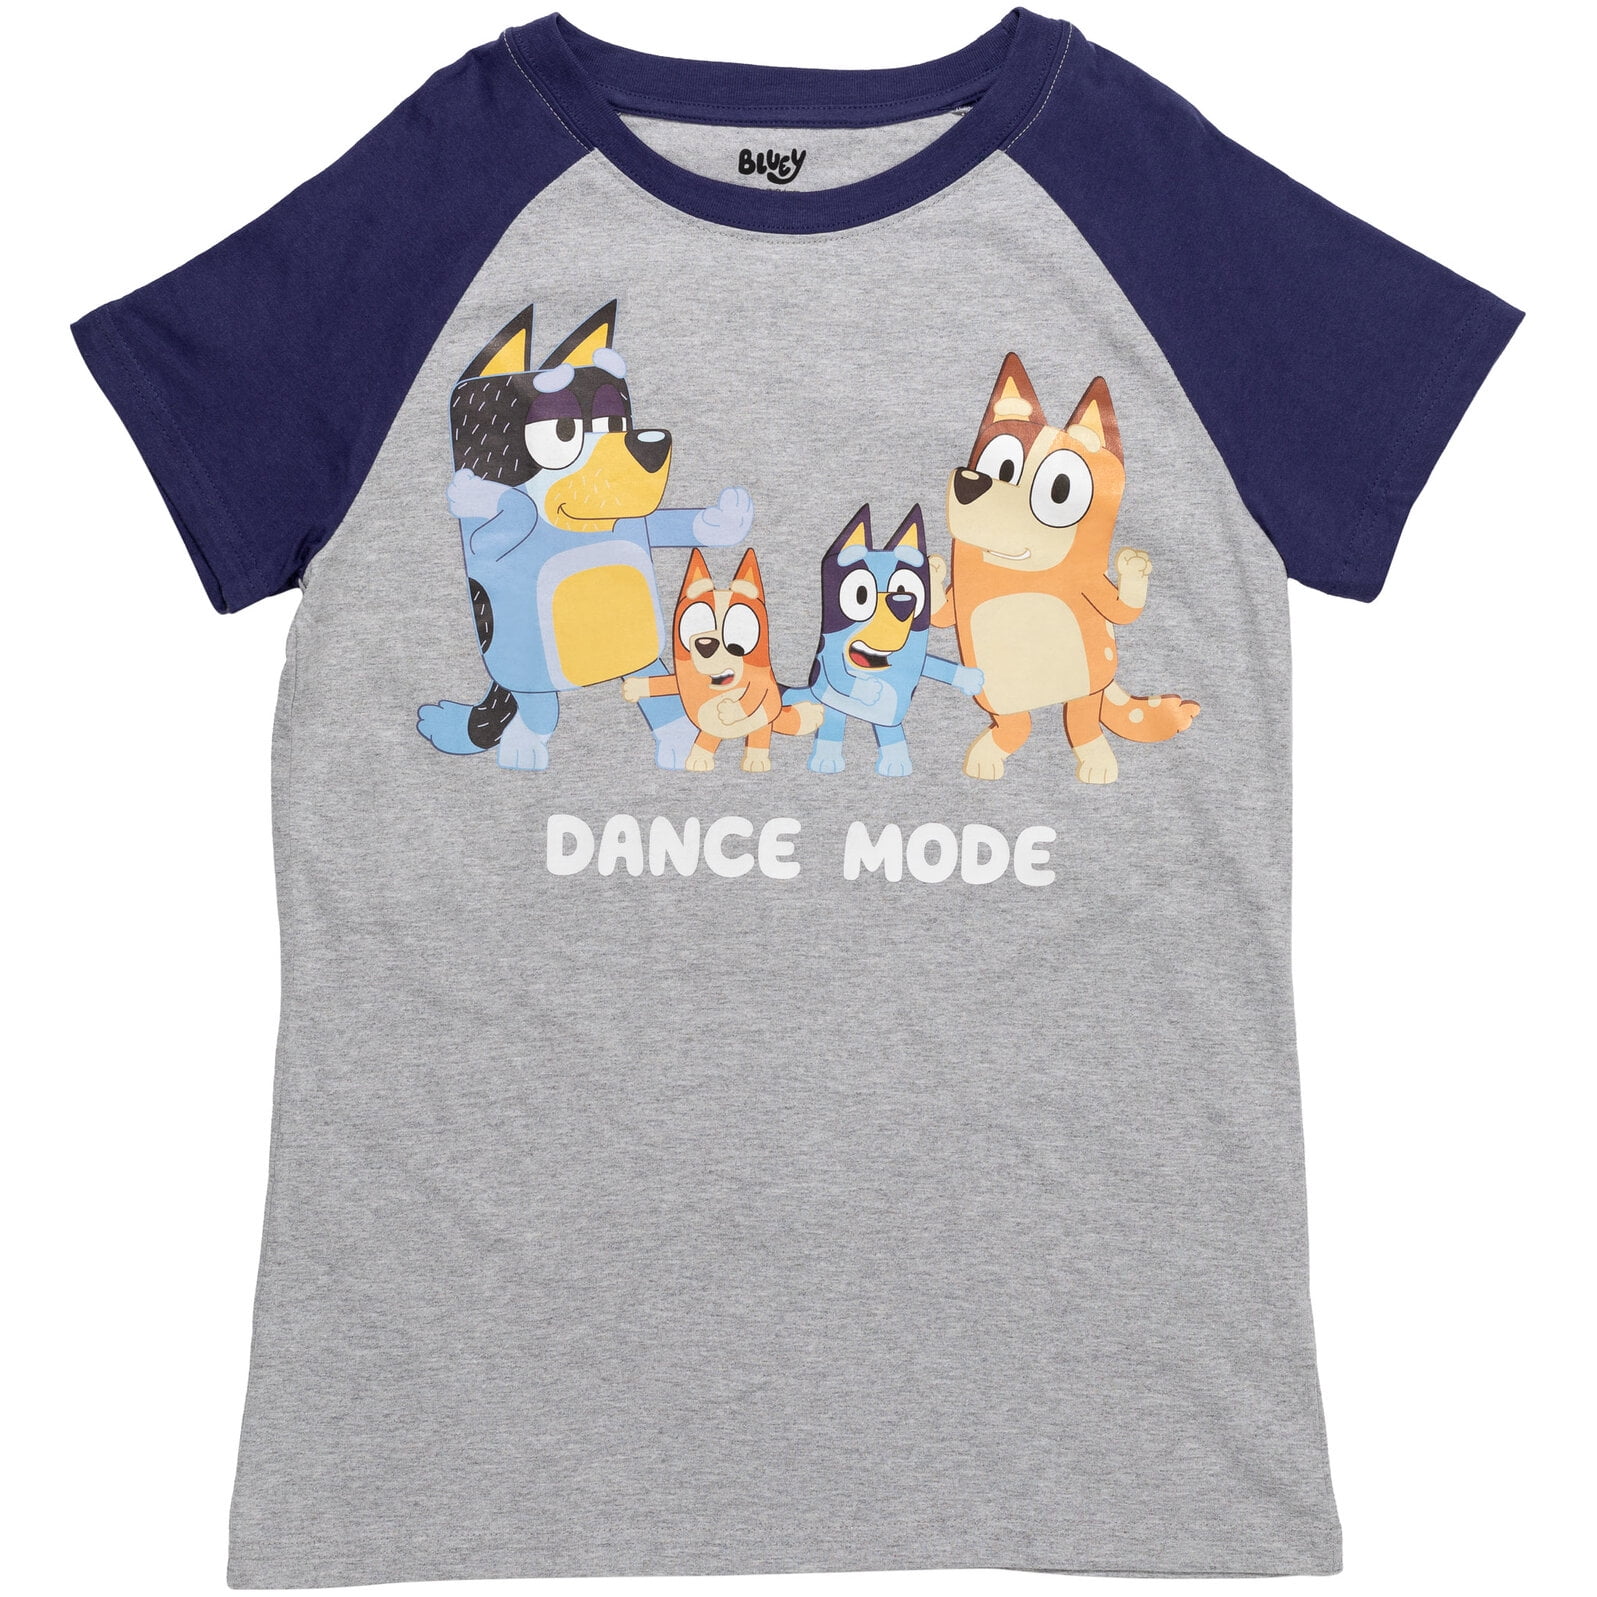 Bluey Mom & Dad Matching Family T-Shirt - Bluey Official Website